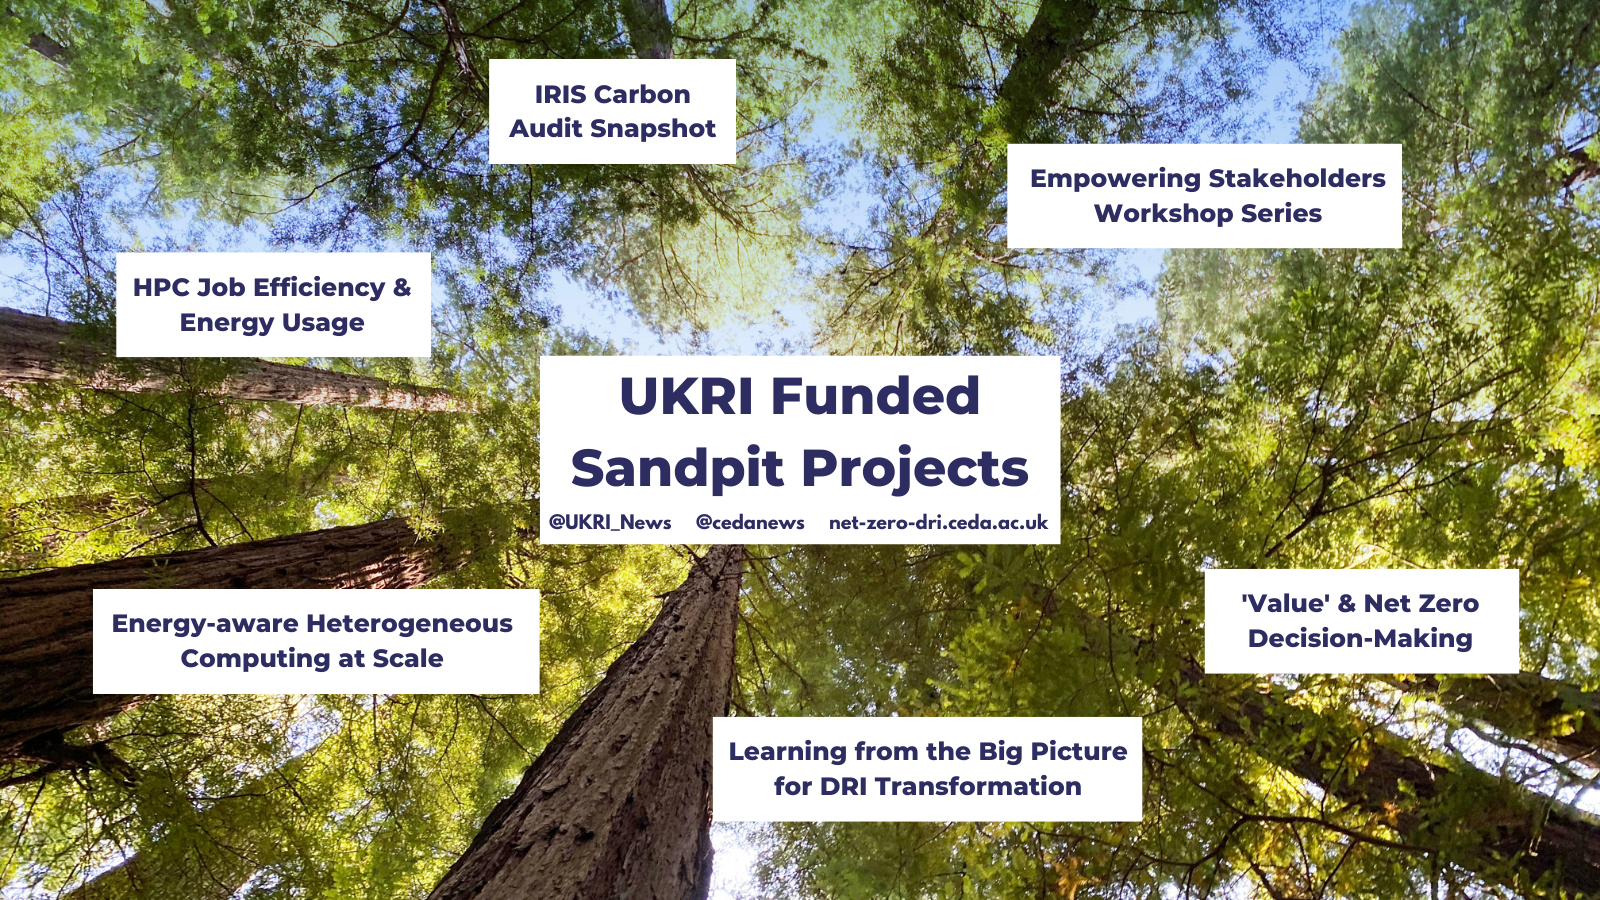 Mindmap on top of image of tree canopy. Central text reads 'UKRI Funded Sandpit Projects'. The projects are 'Empowering Stakeholders Workshop series', 'Value and Net Zero Decision-Making', 'Learning from the Big Picture for DRI Transformation', 'Energy-aware heterogeneous computing at scale', 'HPC Job Efficiency & Energy Usage' and 'IRIS Carbon Audit Snapshot'.